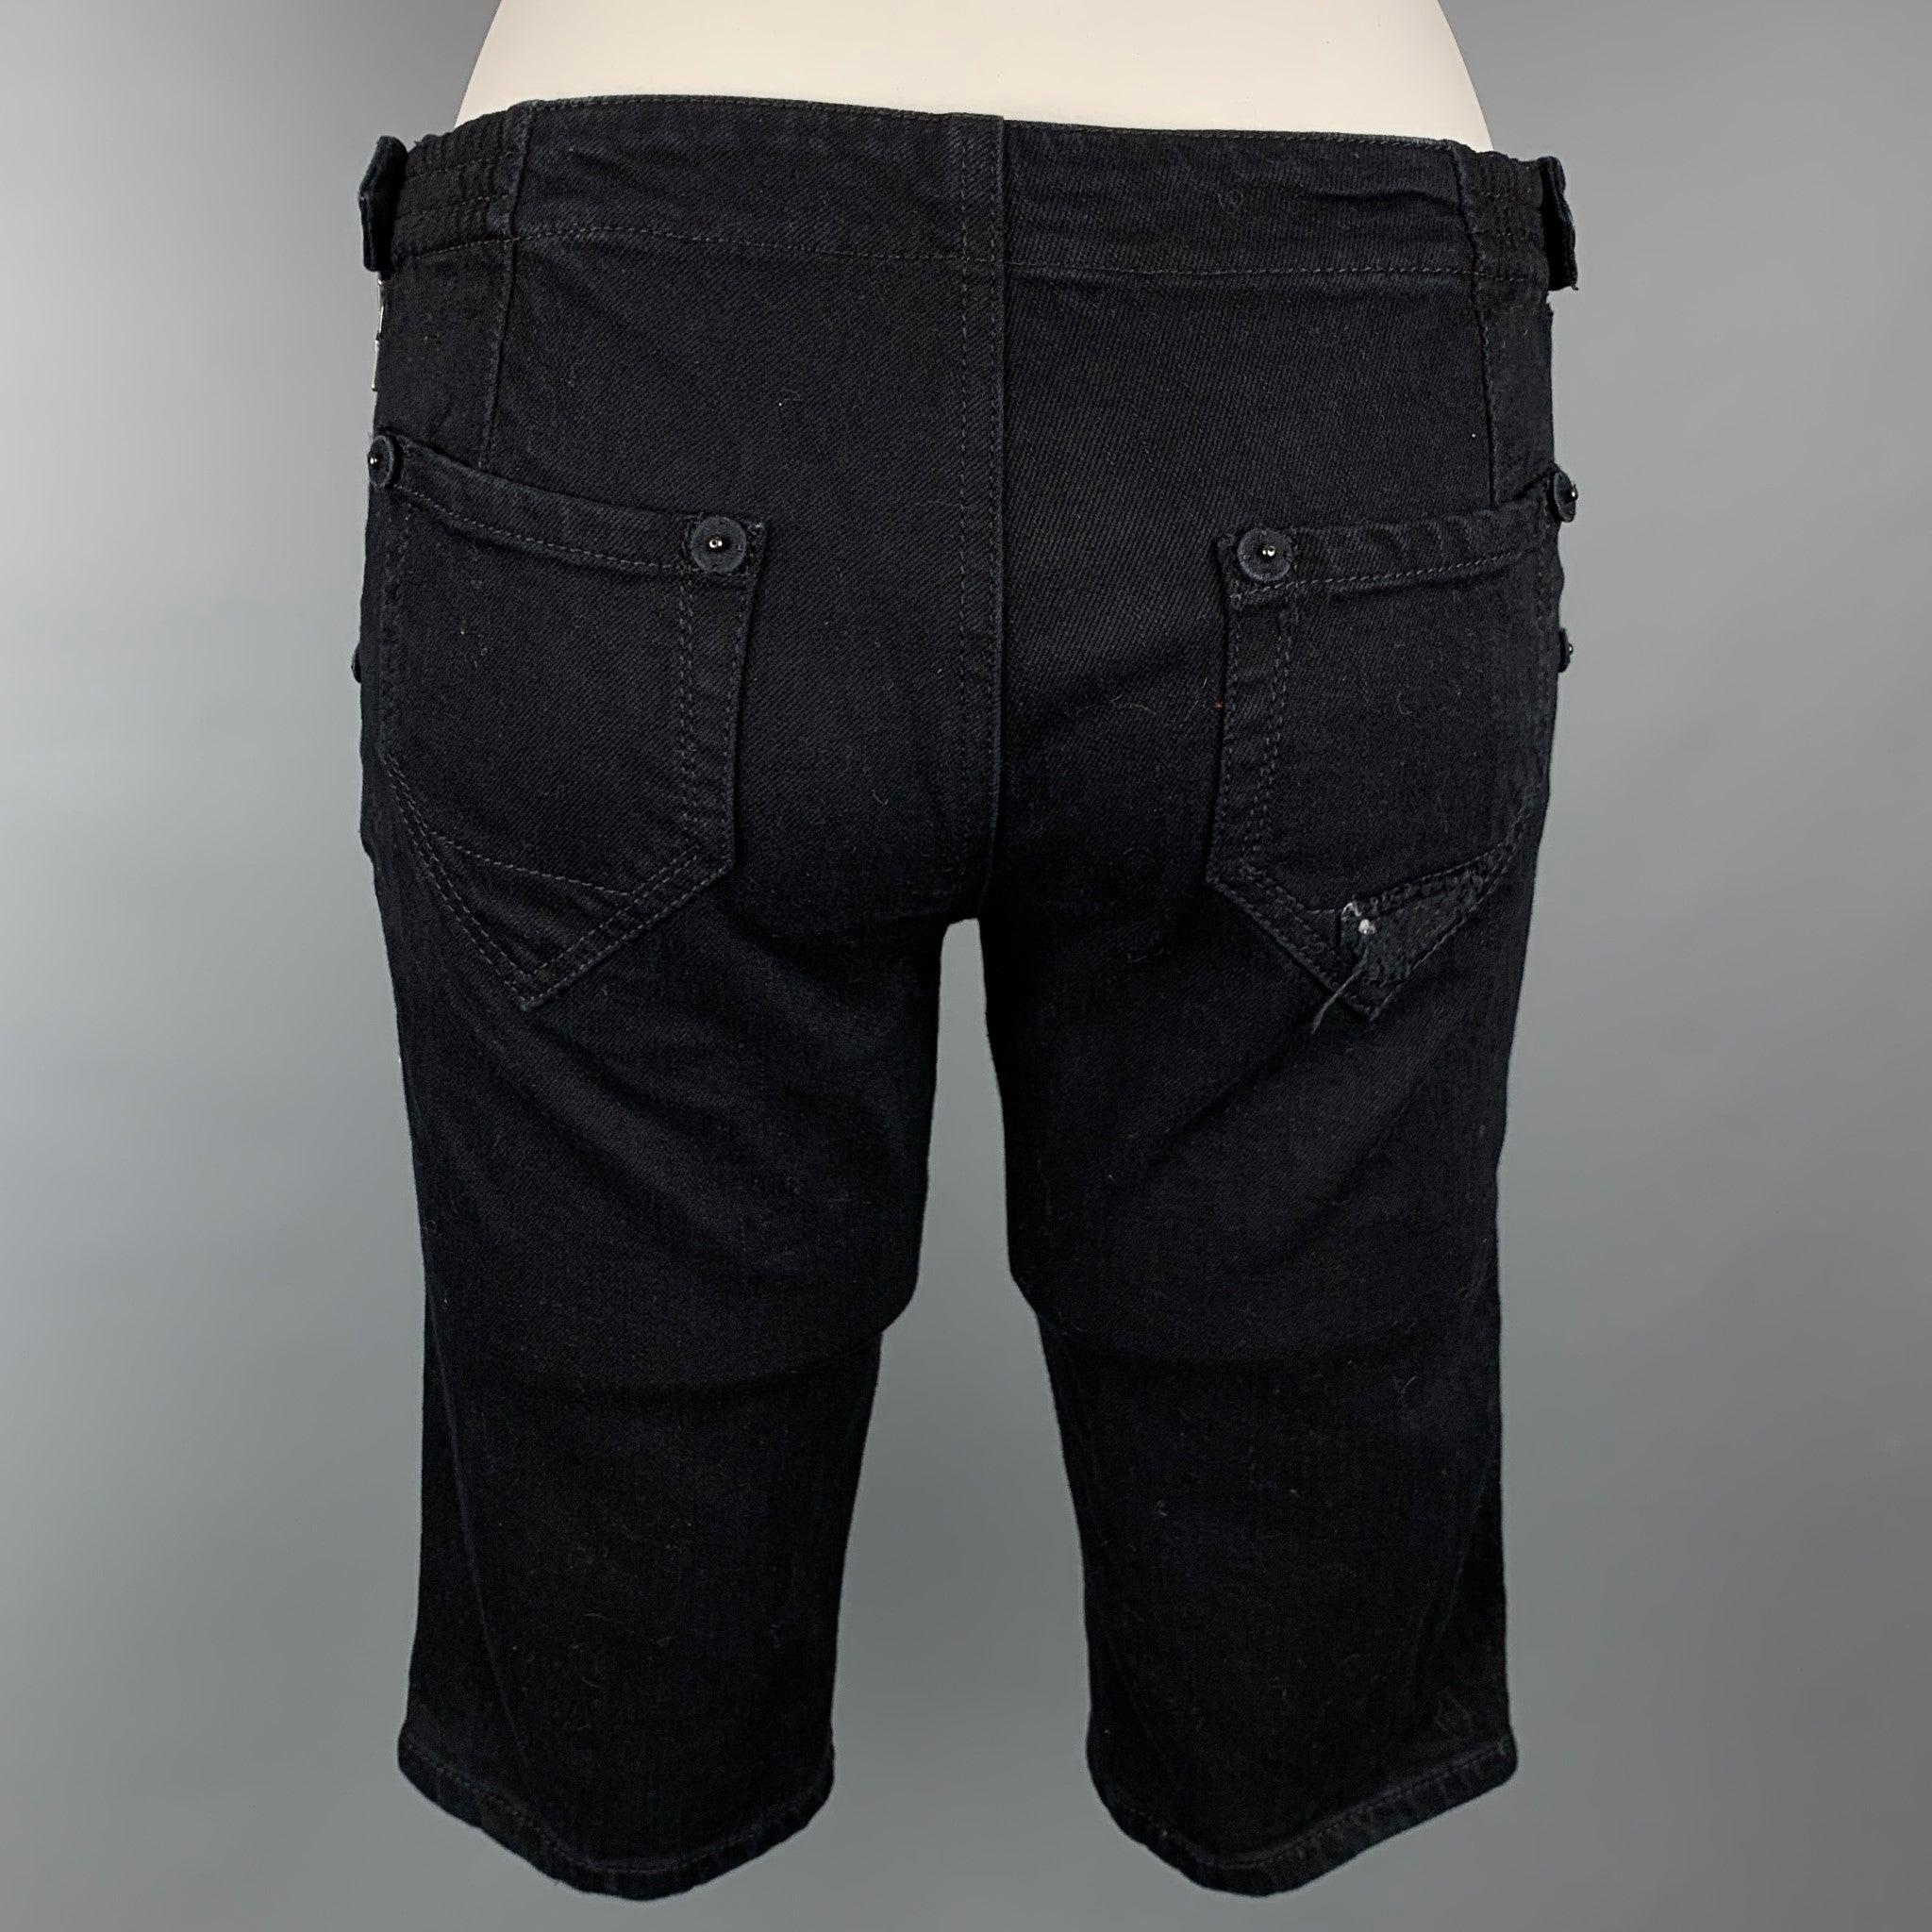 PRADA shorts comes in a black denim featuring front & back pockets and a side button and zipper closure. Made in Italy.Very Good
Pre-Owned Condition. 

Marked:   26 

Measurements: 
  Waist: 28 inches  Rise: 8 inches  Inseam: 12.5 inches 
  
  
